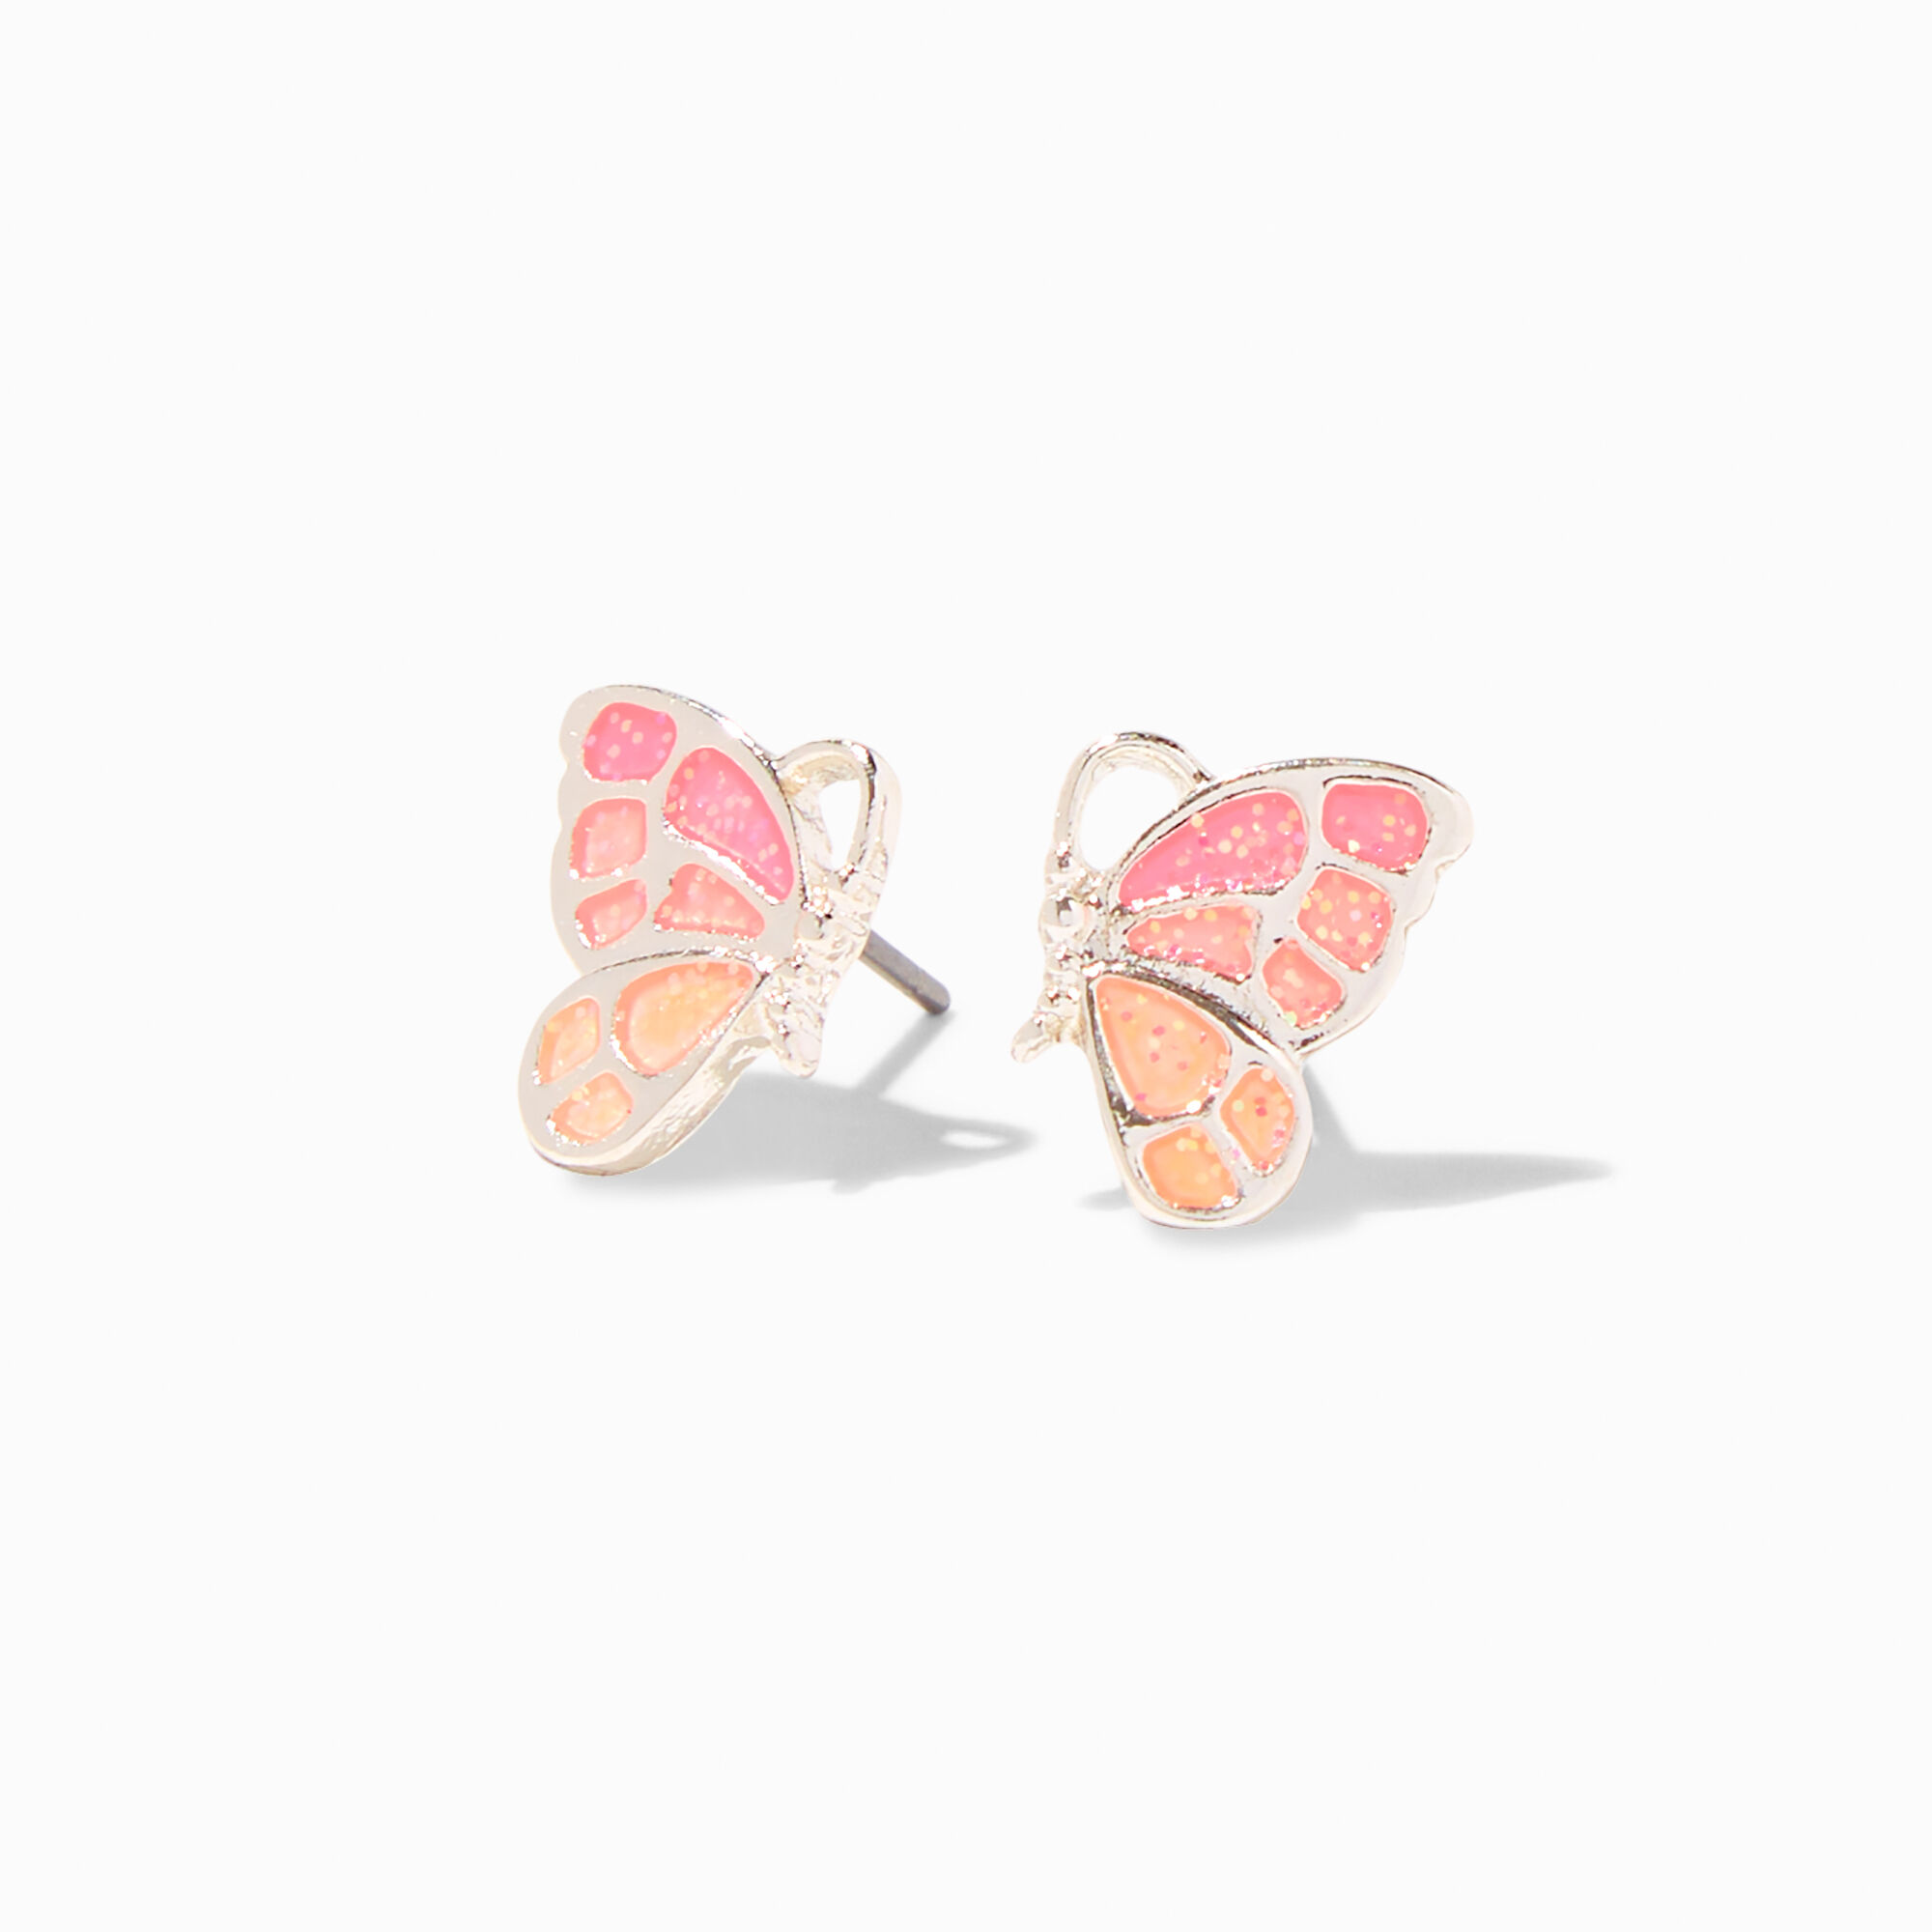 View Claires Tone Uv ColorChanging Glitter Butterfly Stud Earrings Silver information